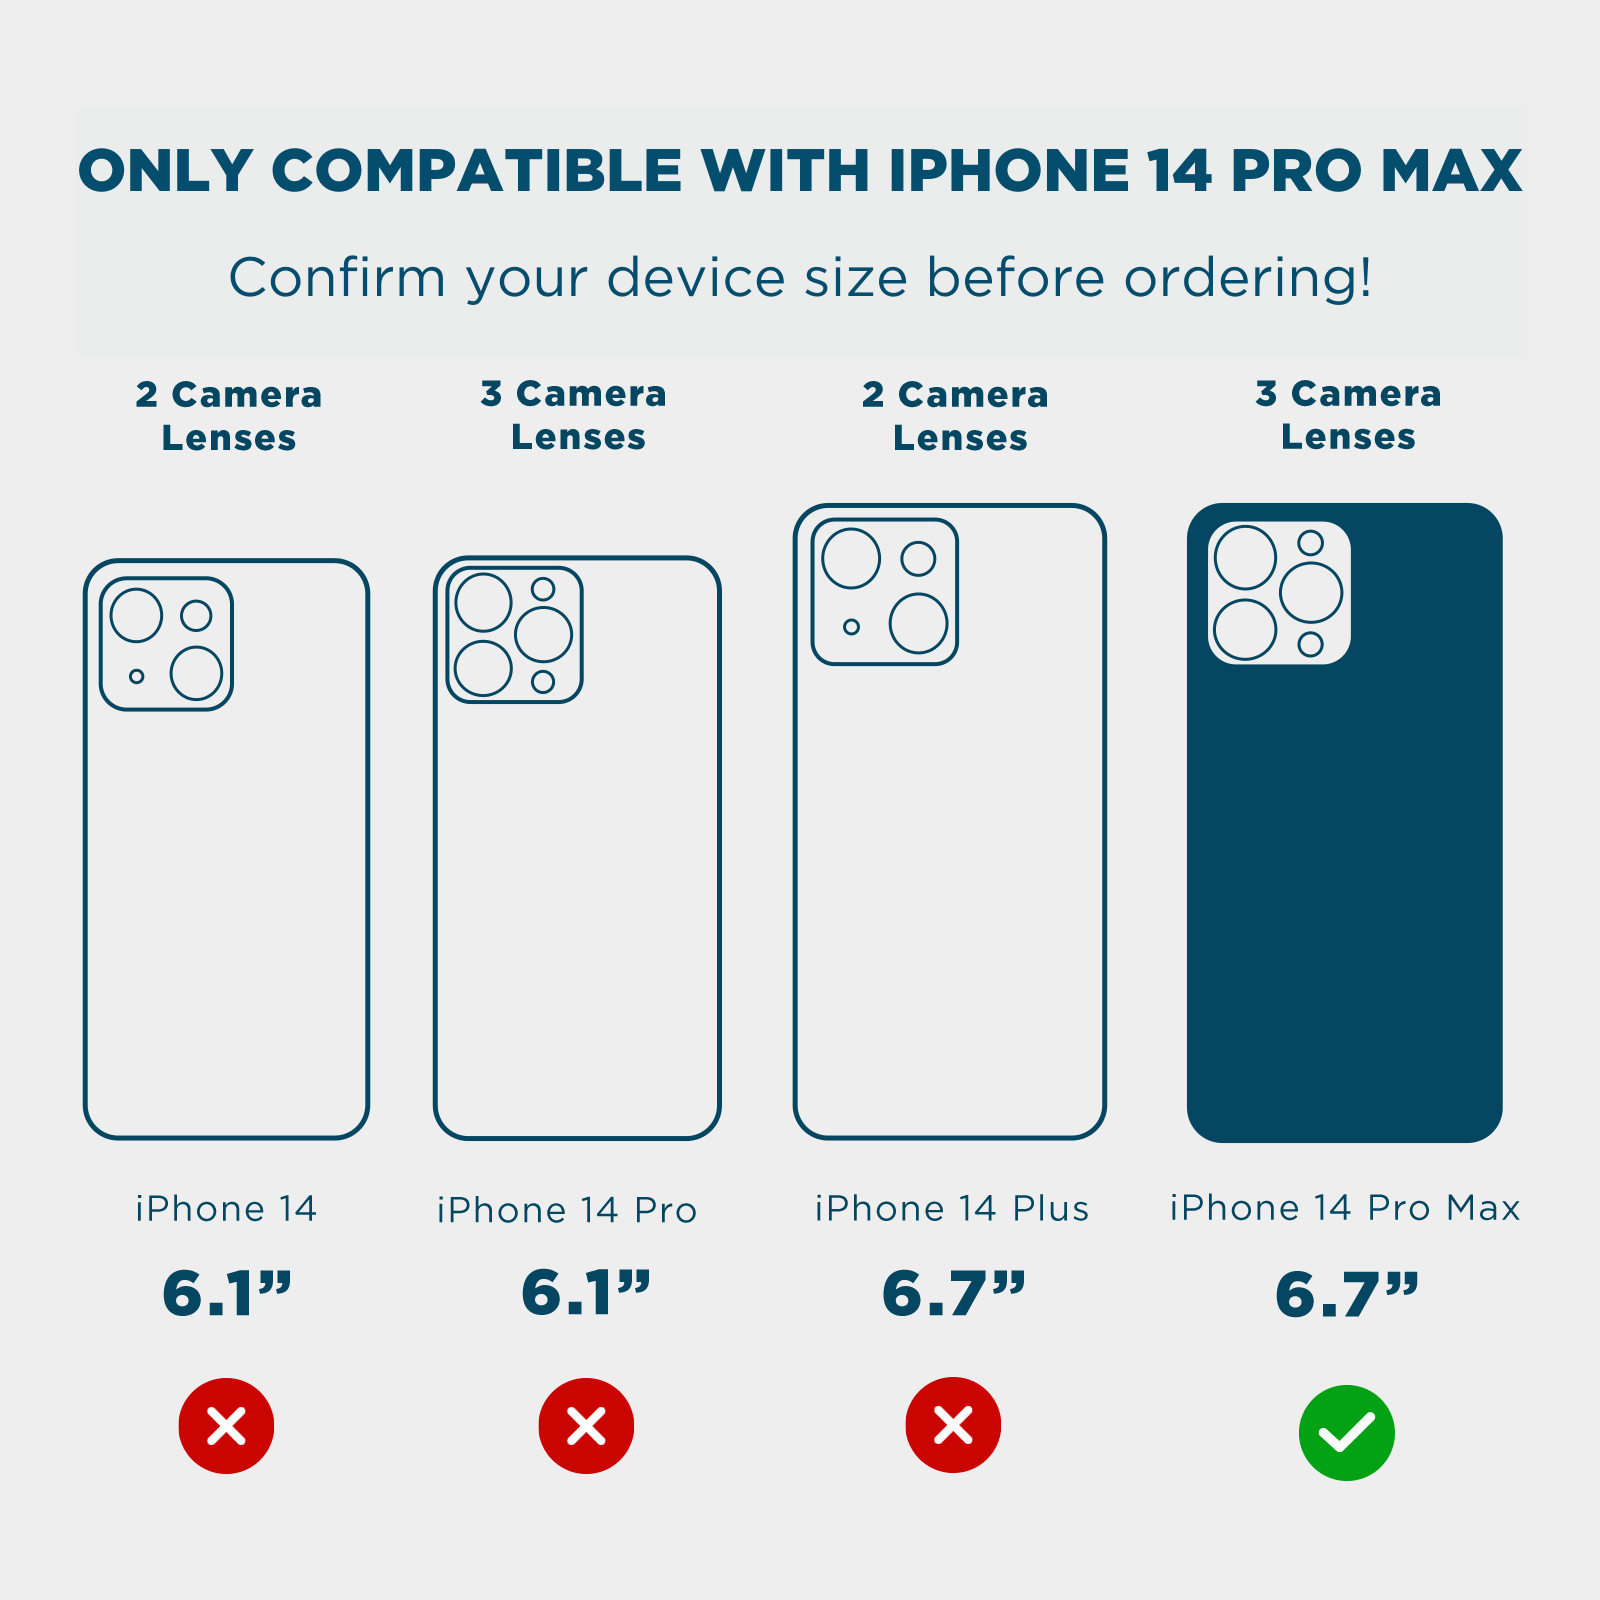 ONLY COMPATIBLE WITH IPHONE 14 PRO MAX. CONFIRM YOUR DEVICE SIZE BEFORE ORDERING. 2 CAMERA LENSES, 3 CAMERA LENSES, 2 CAMERA LENSES, 3 CAMERA LENSES, 6.1, 6.1, 6.7, 6.7. COLOR::KARAT MARBLE